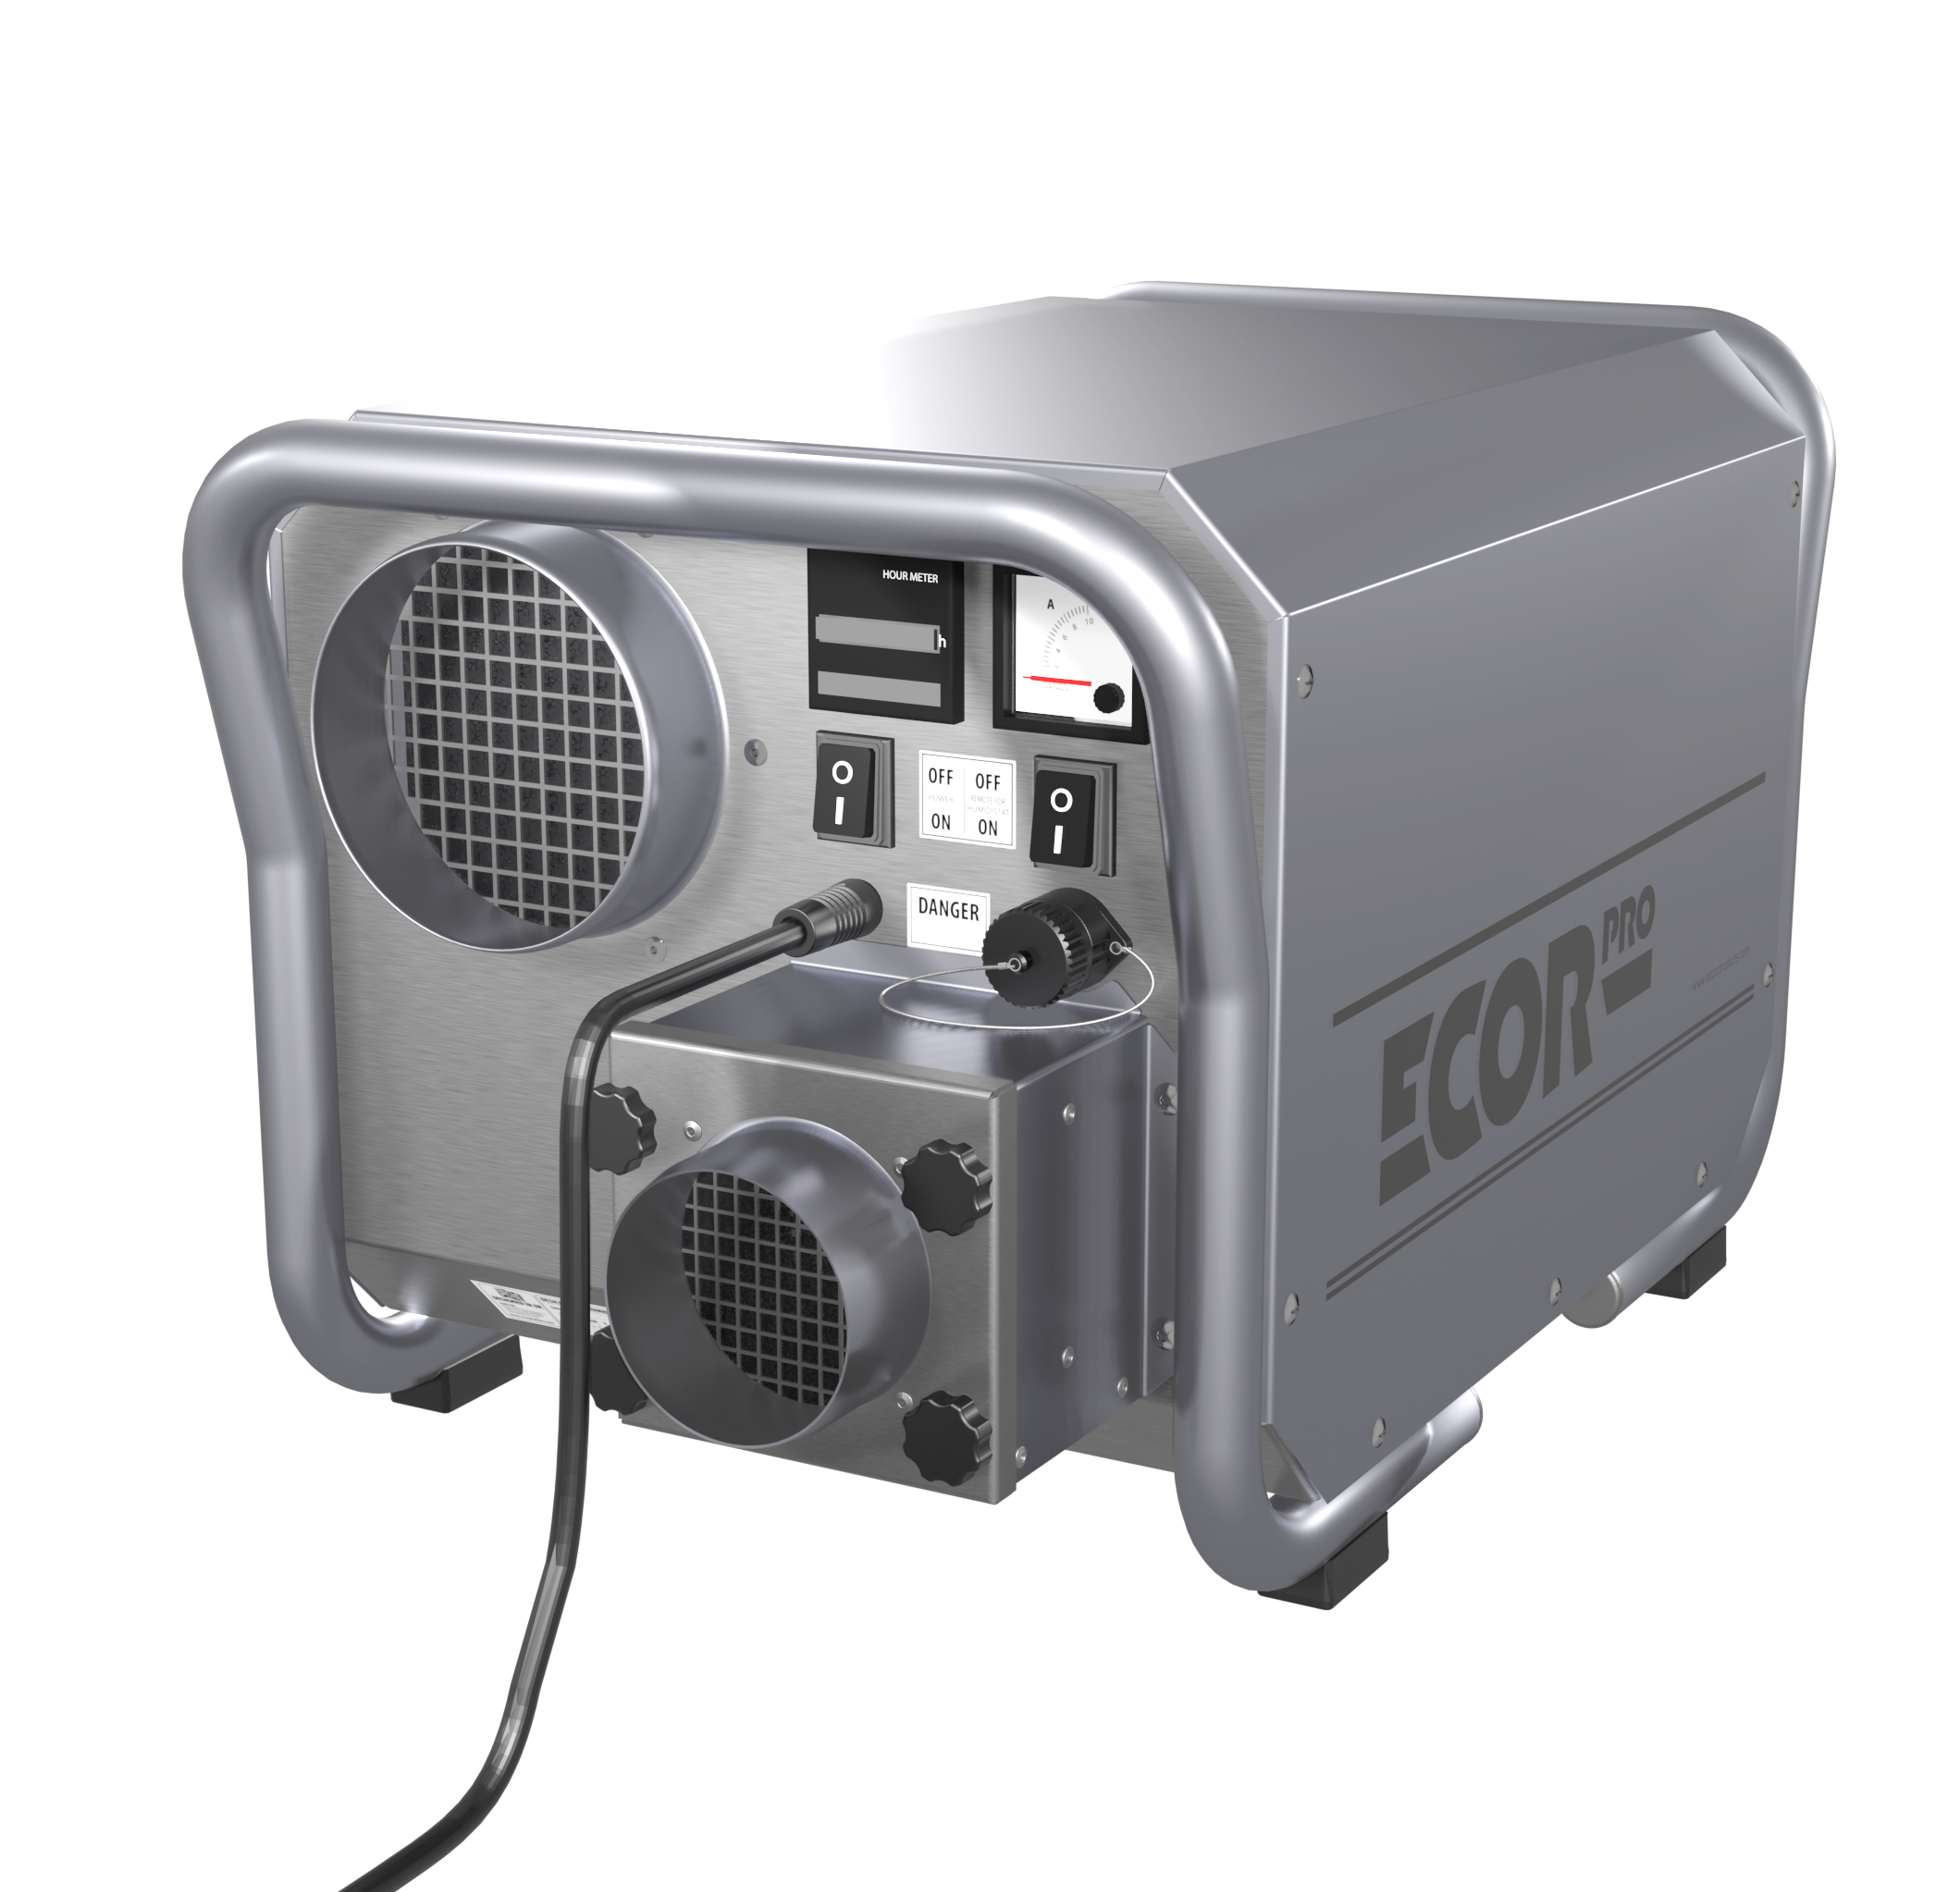 dh3500inox epd200pro front dehumidifiers by Ecor Pro